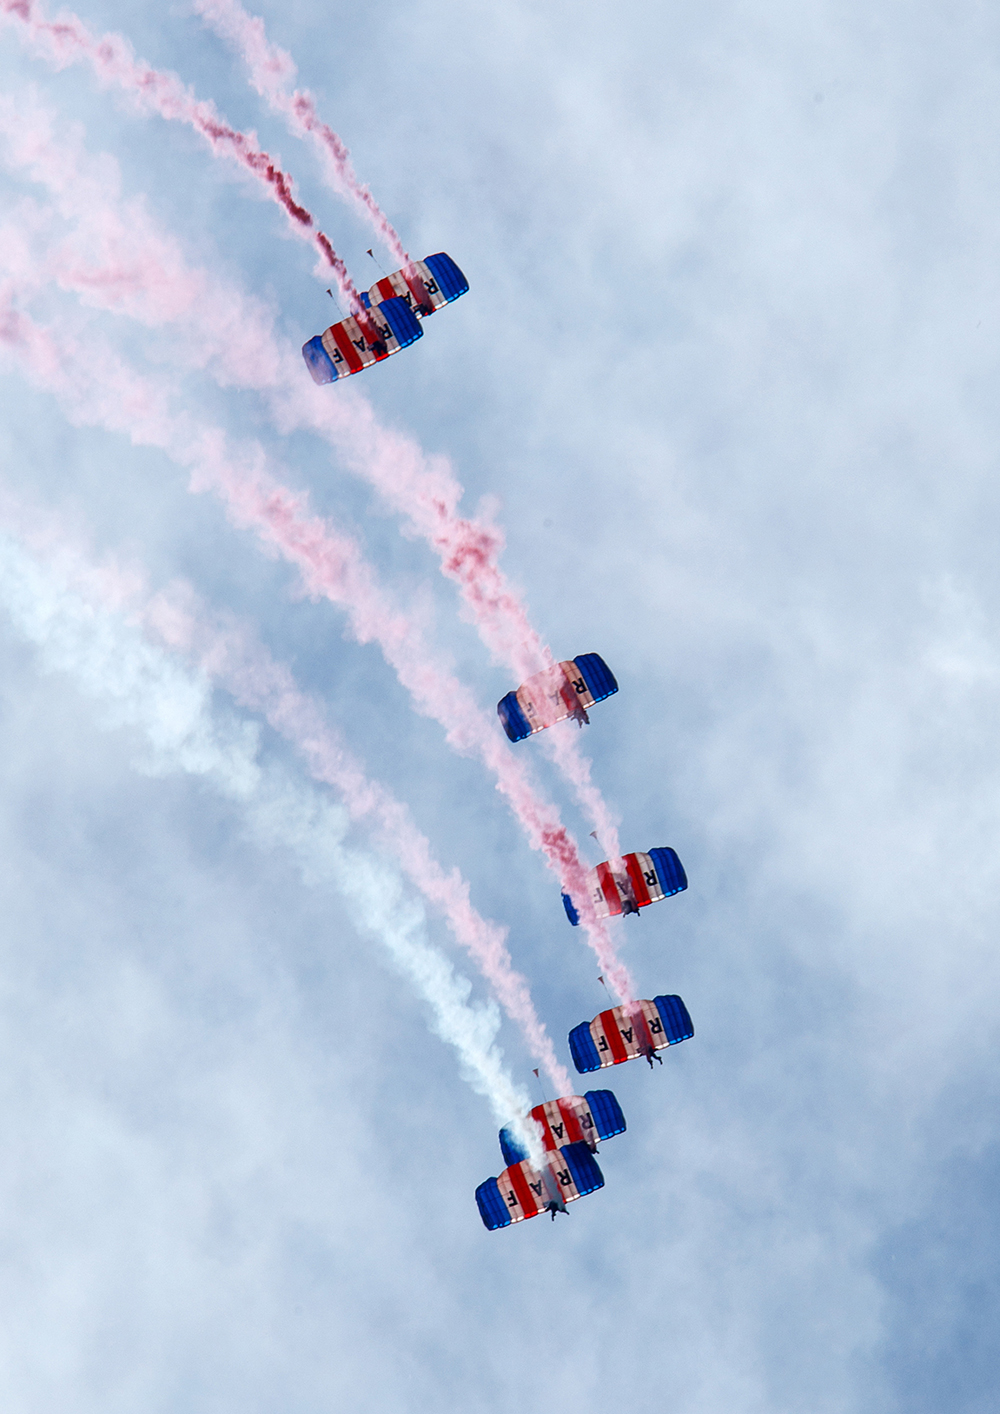 The RAF Falcons forming their 'Falcon Stack' during during their Public Display Authority display